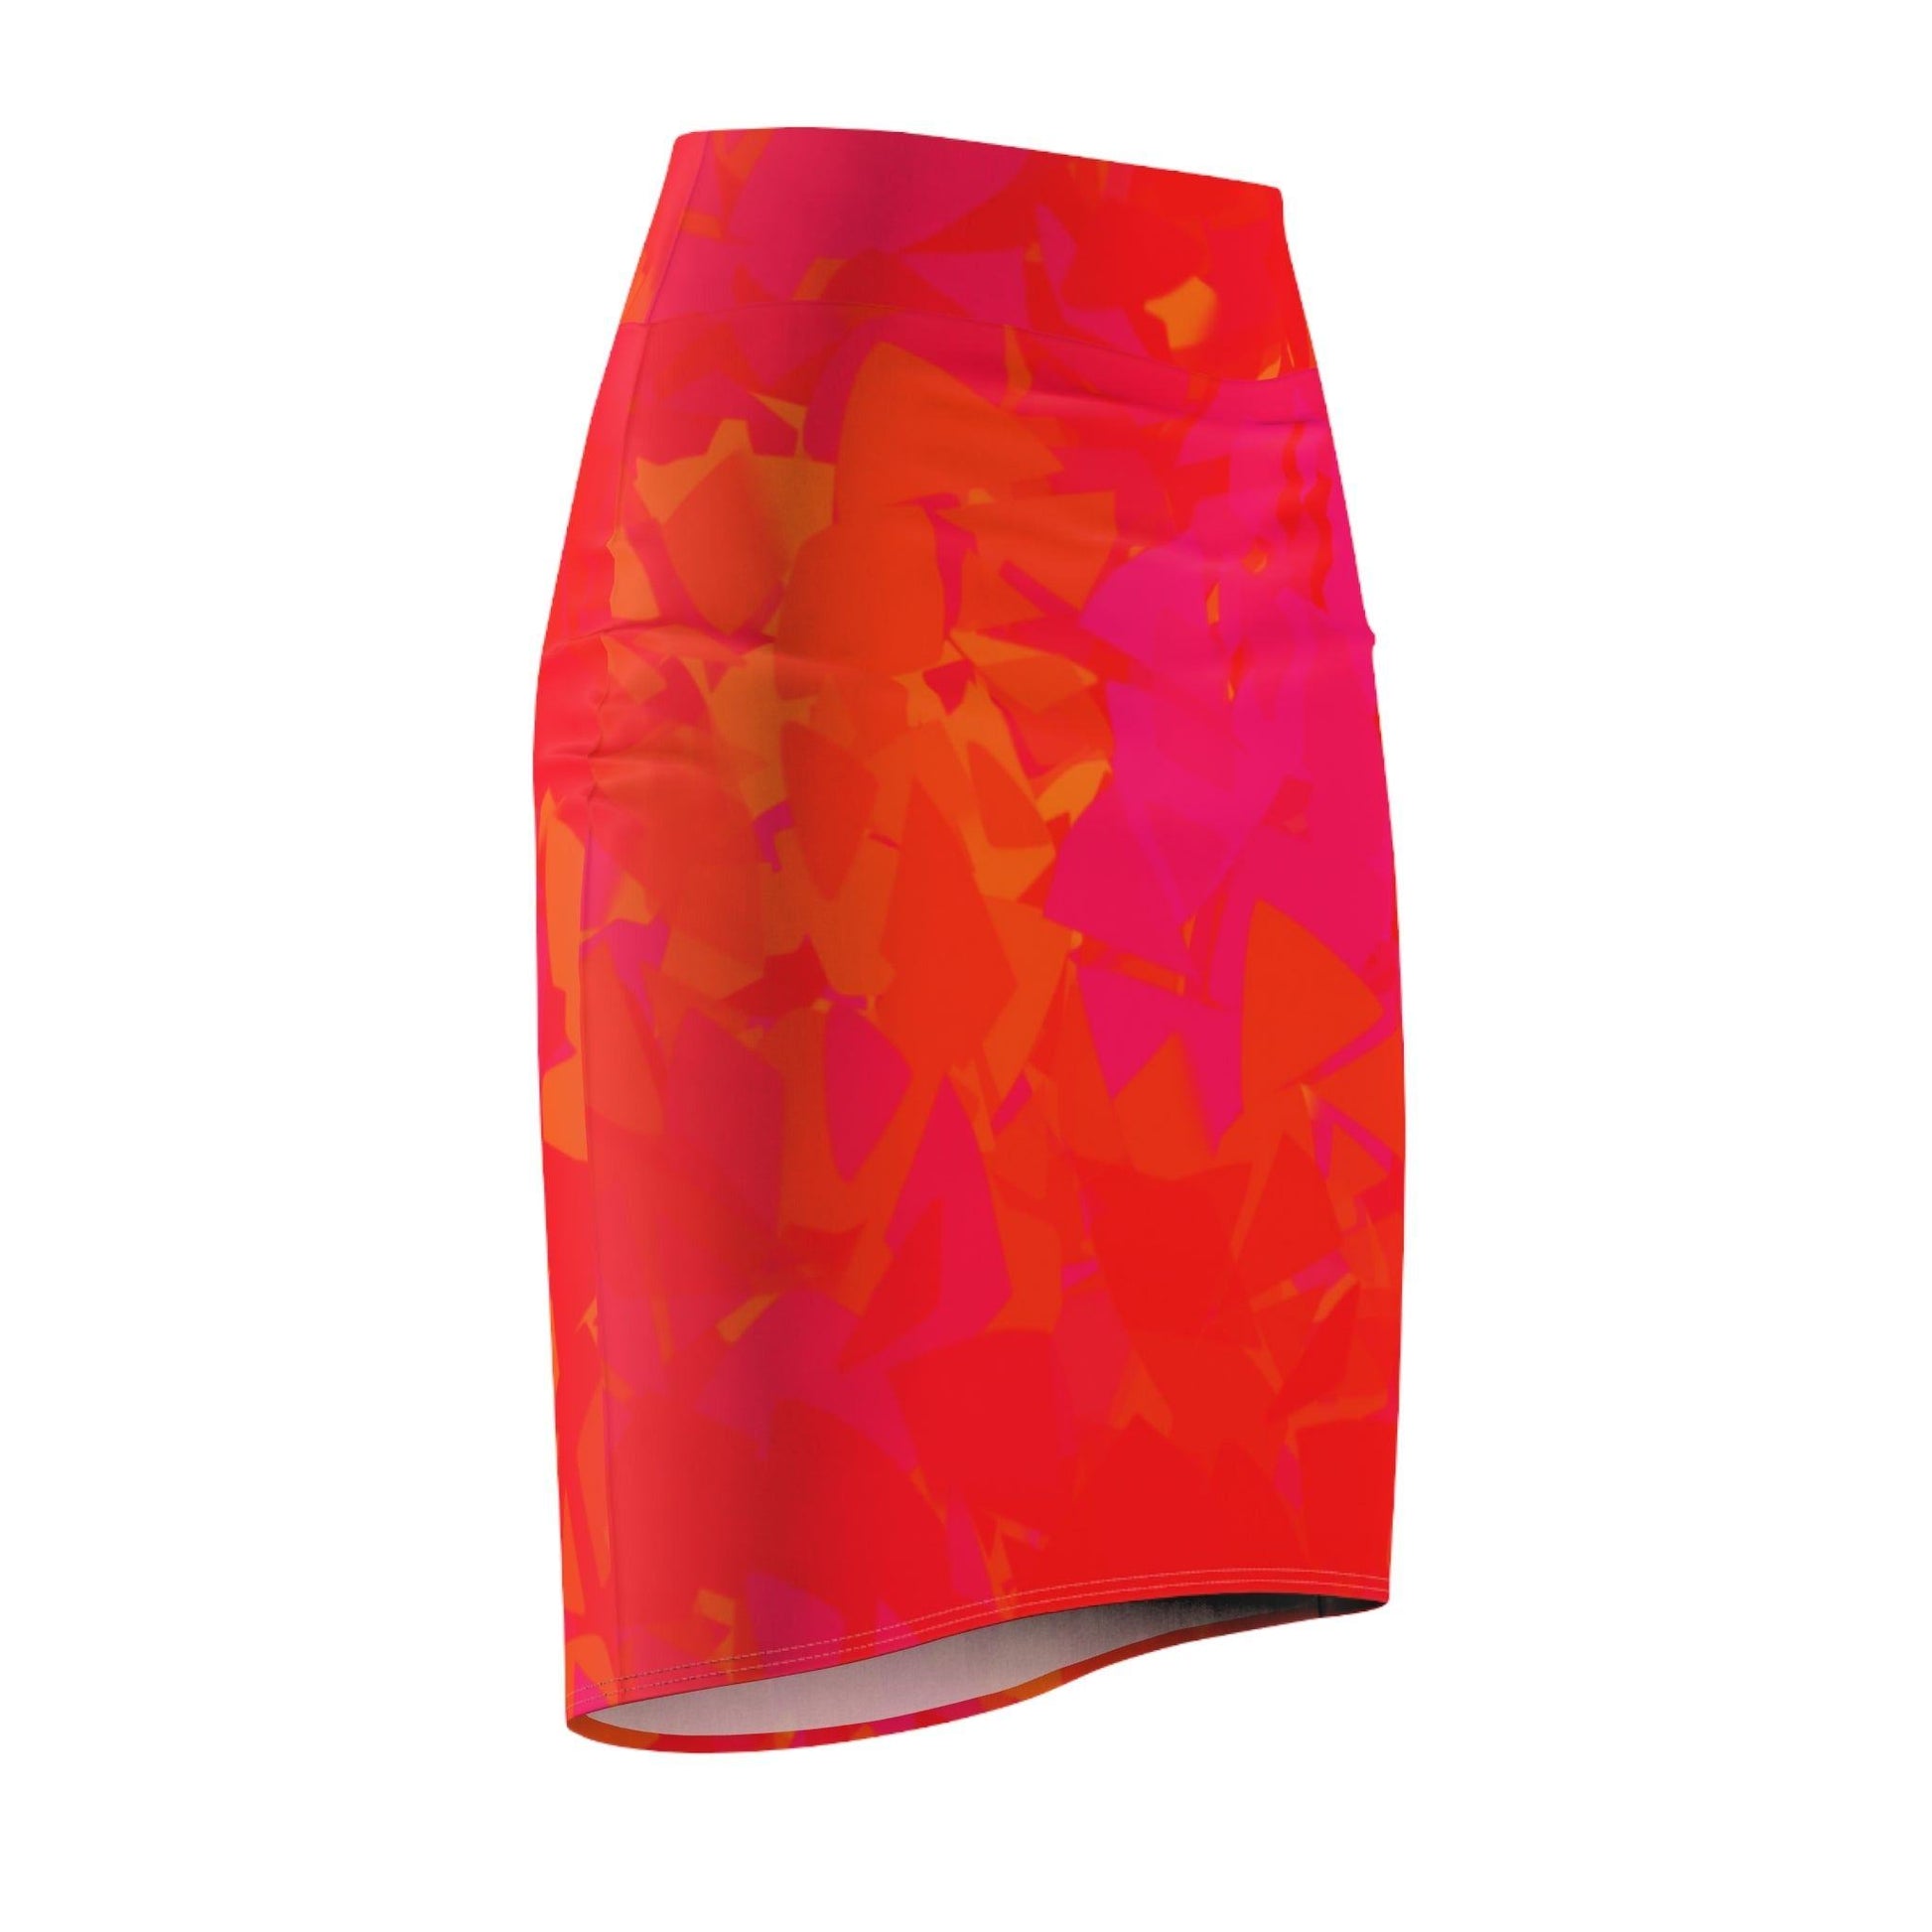 Red Crystal Bleistiftrock Bleistiftrock 74.99 All Over Print, AOP, AOP Clothing, Assembled in the USA, Assembled in USA, Bleistiftrock, Crystal, Made in the USA, Made in USA, Red, Skirts & Dresses, Sublimation, Women's Clothing JLR Design